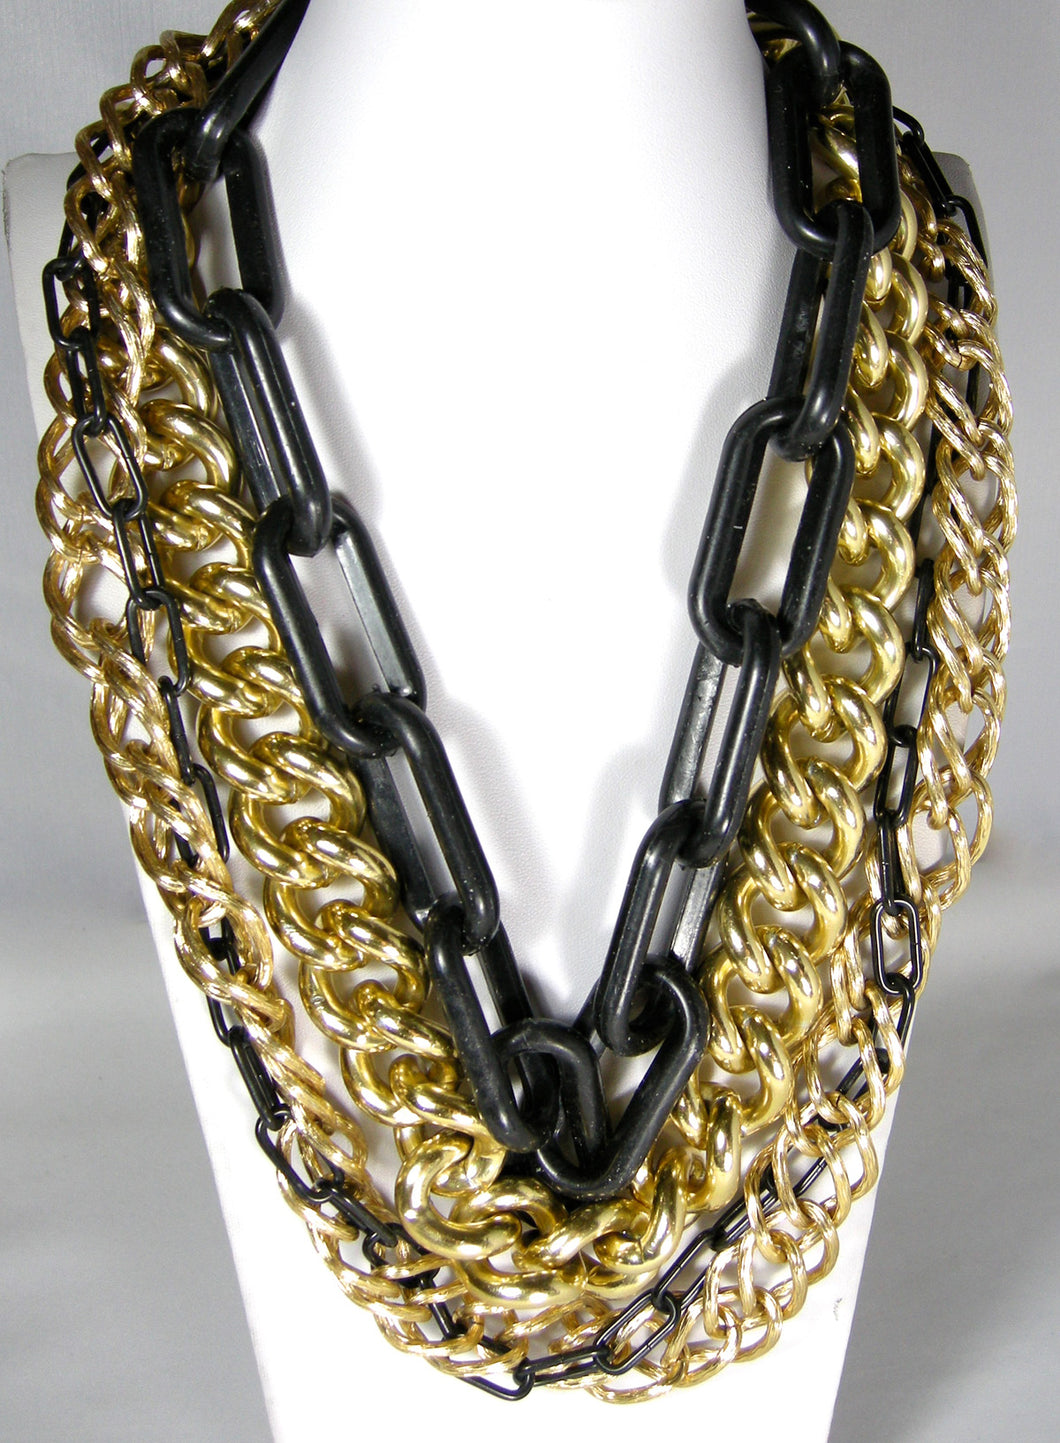 Dramatic Vintage Black & Gold Multi-Chain Necklace - JD10226